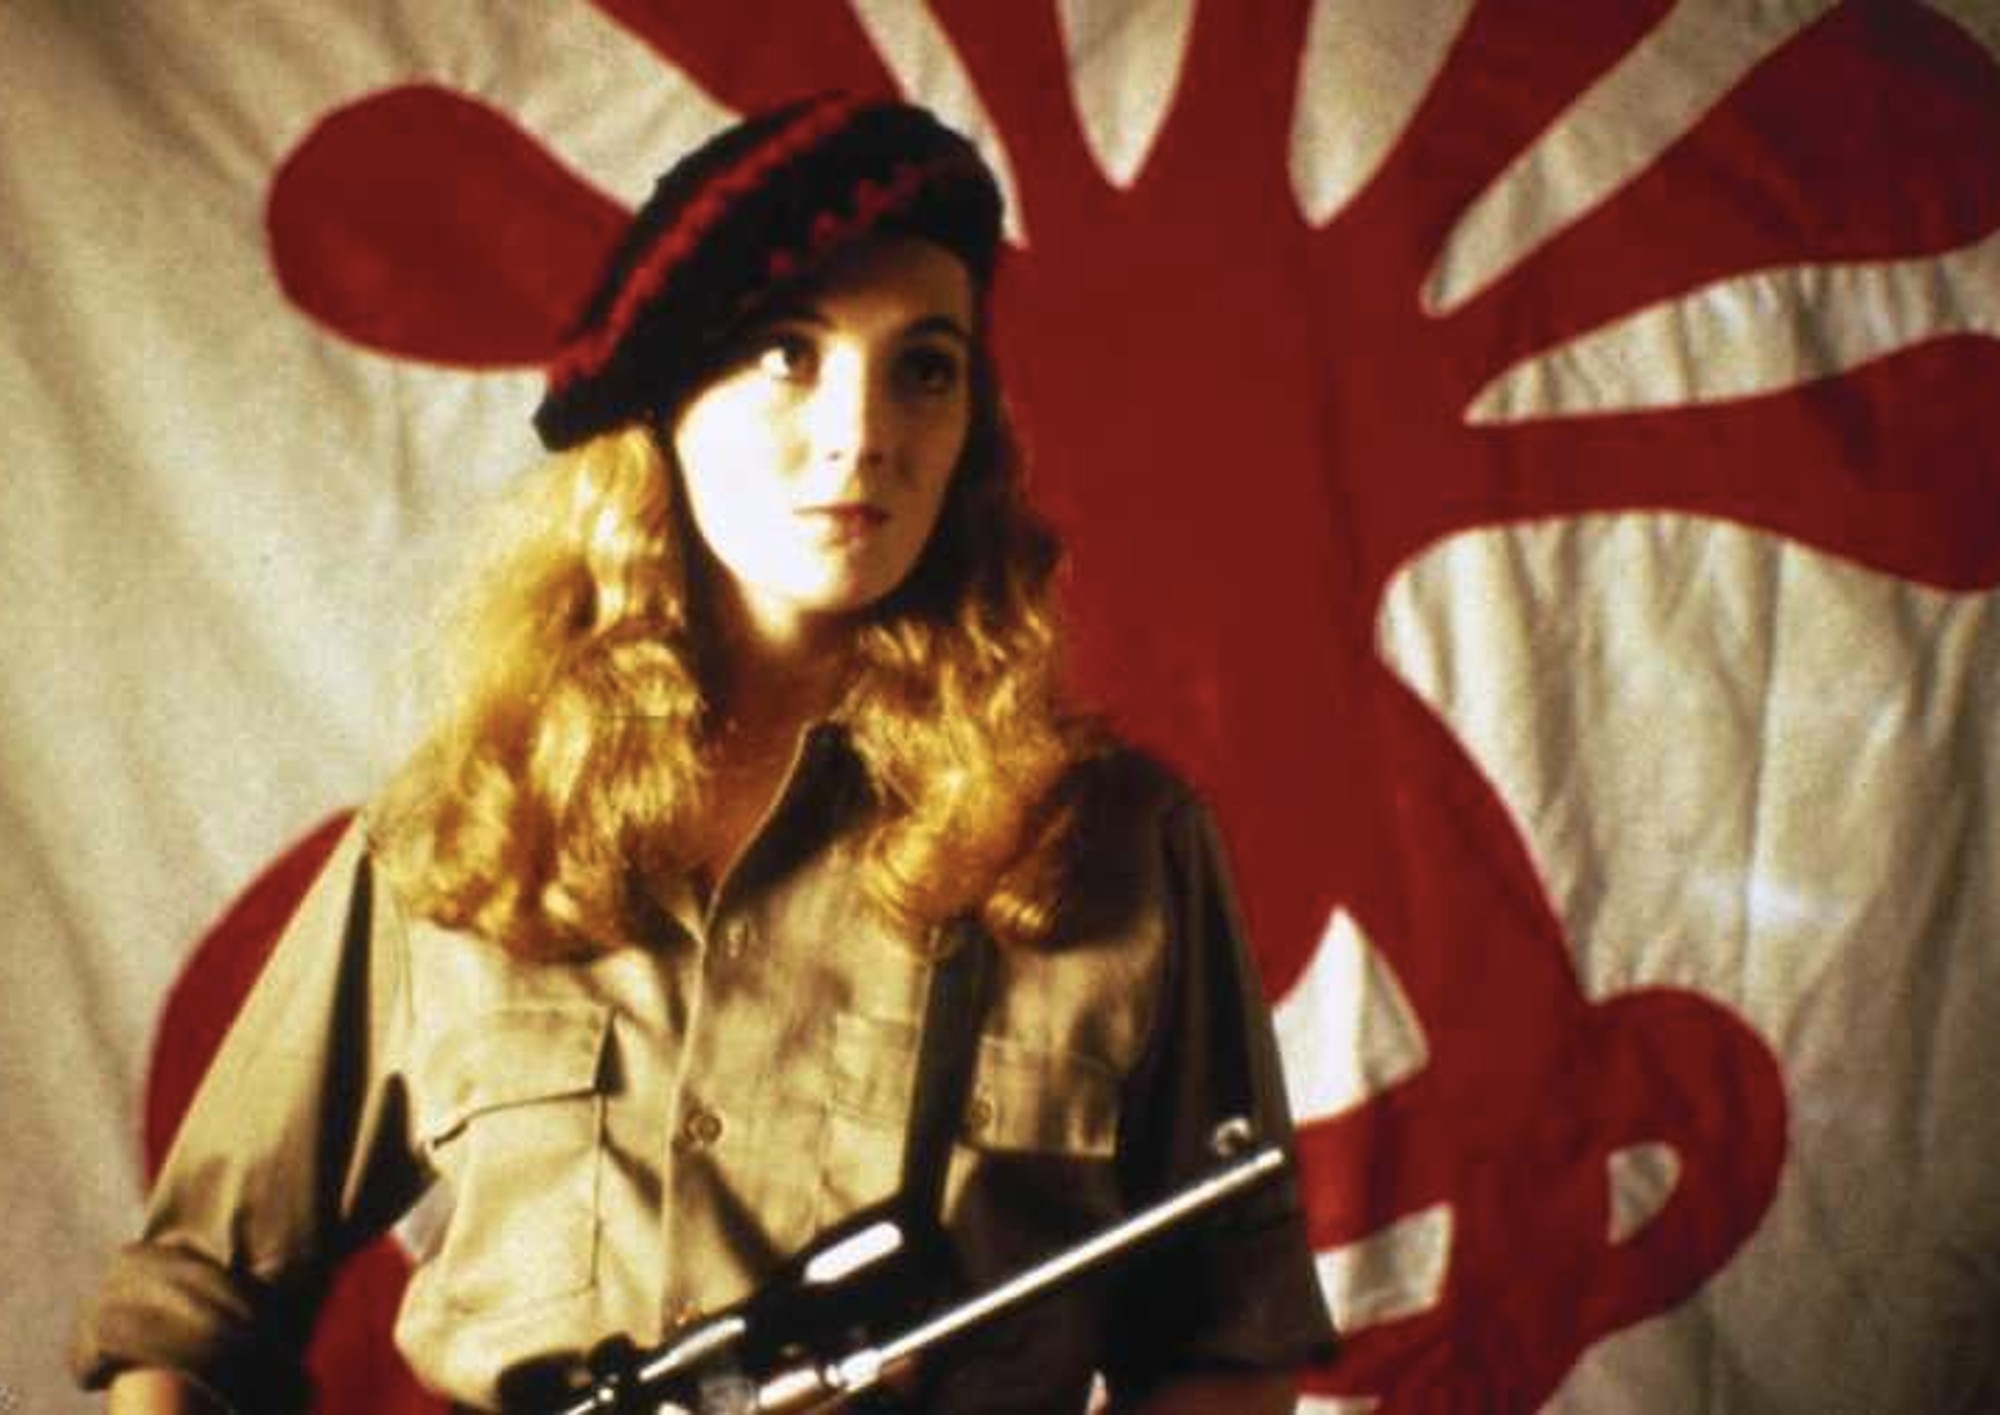 Image from the motion picture Patty Hearst